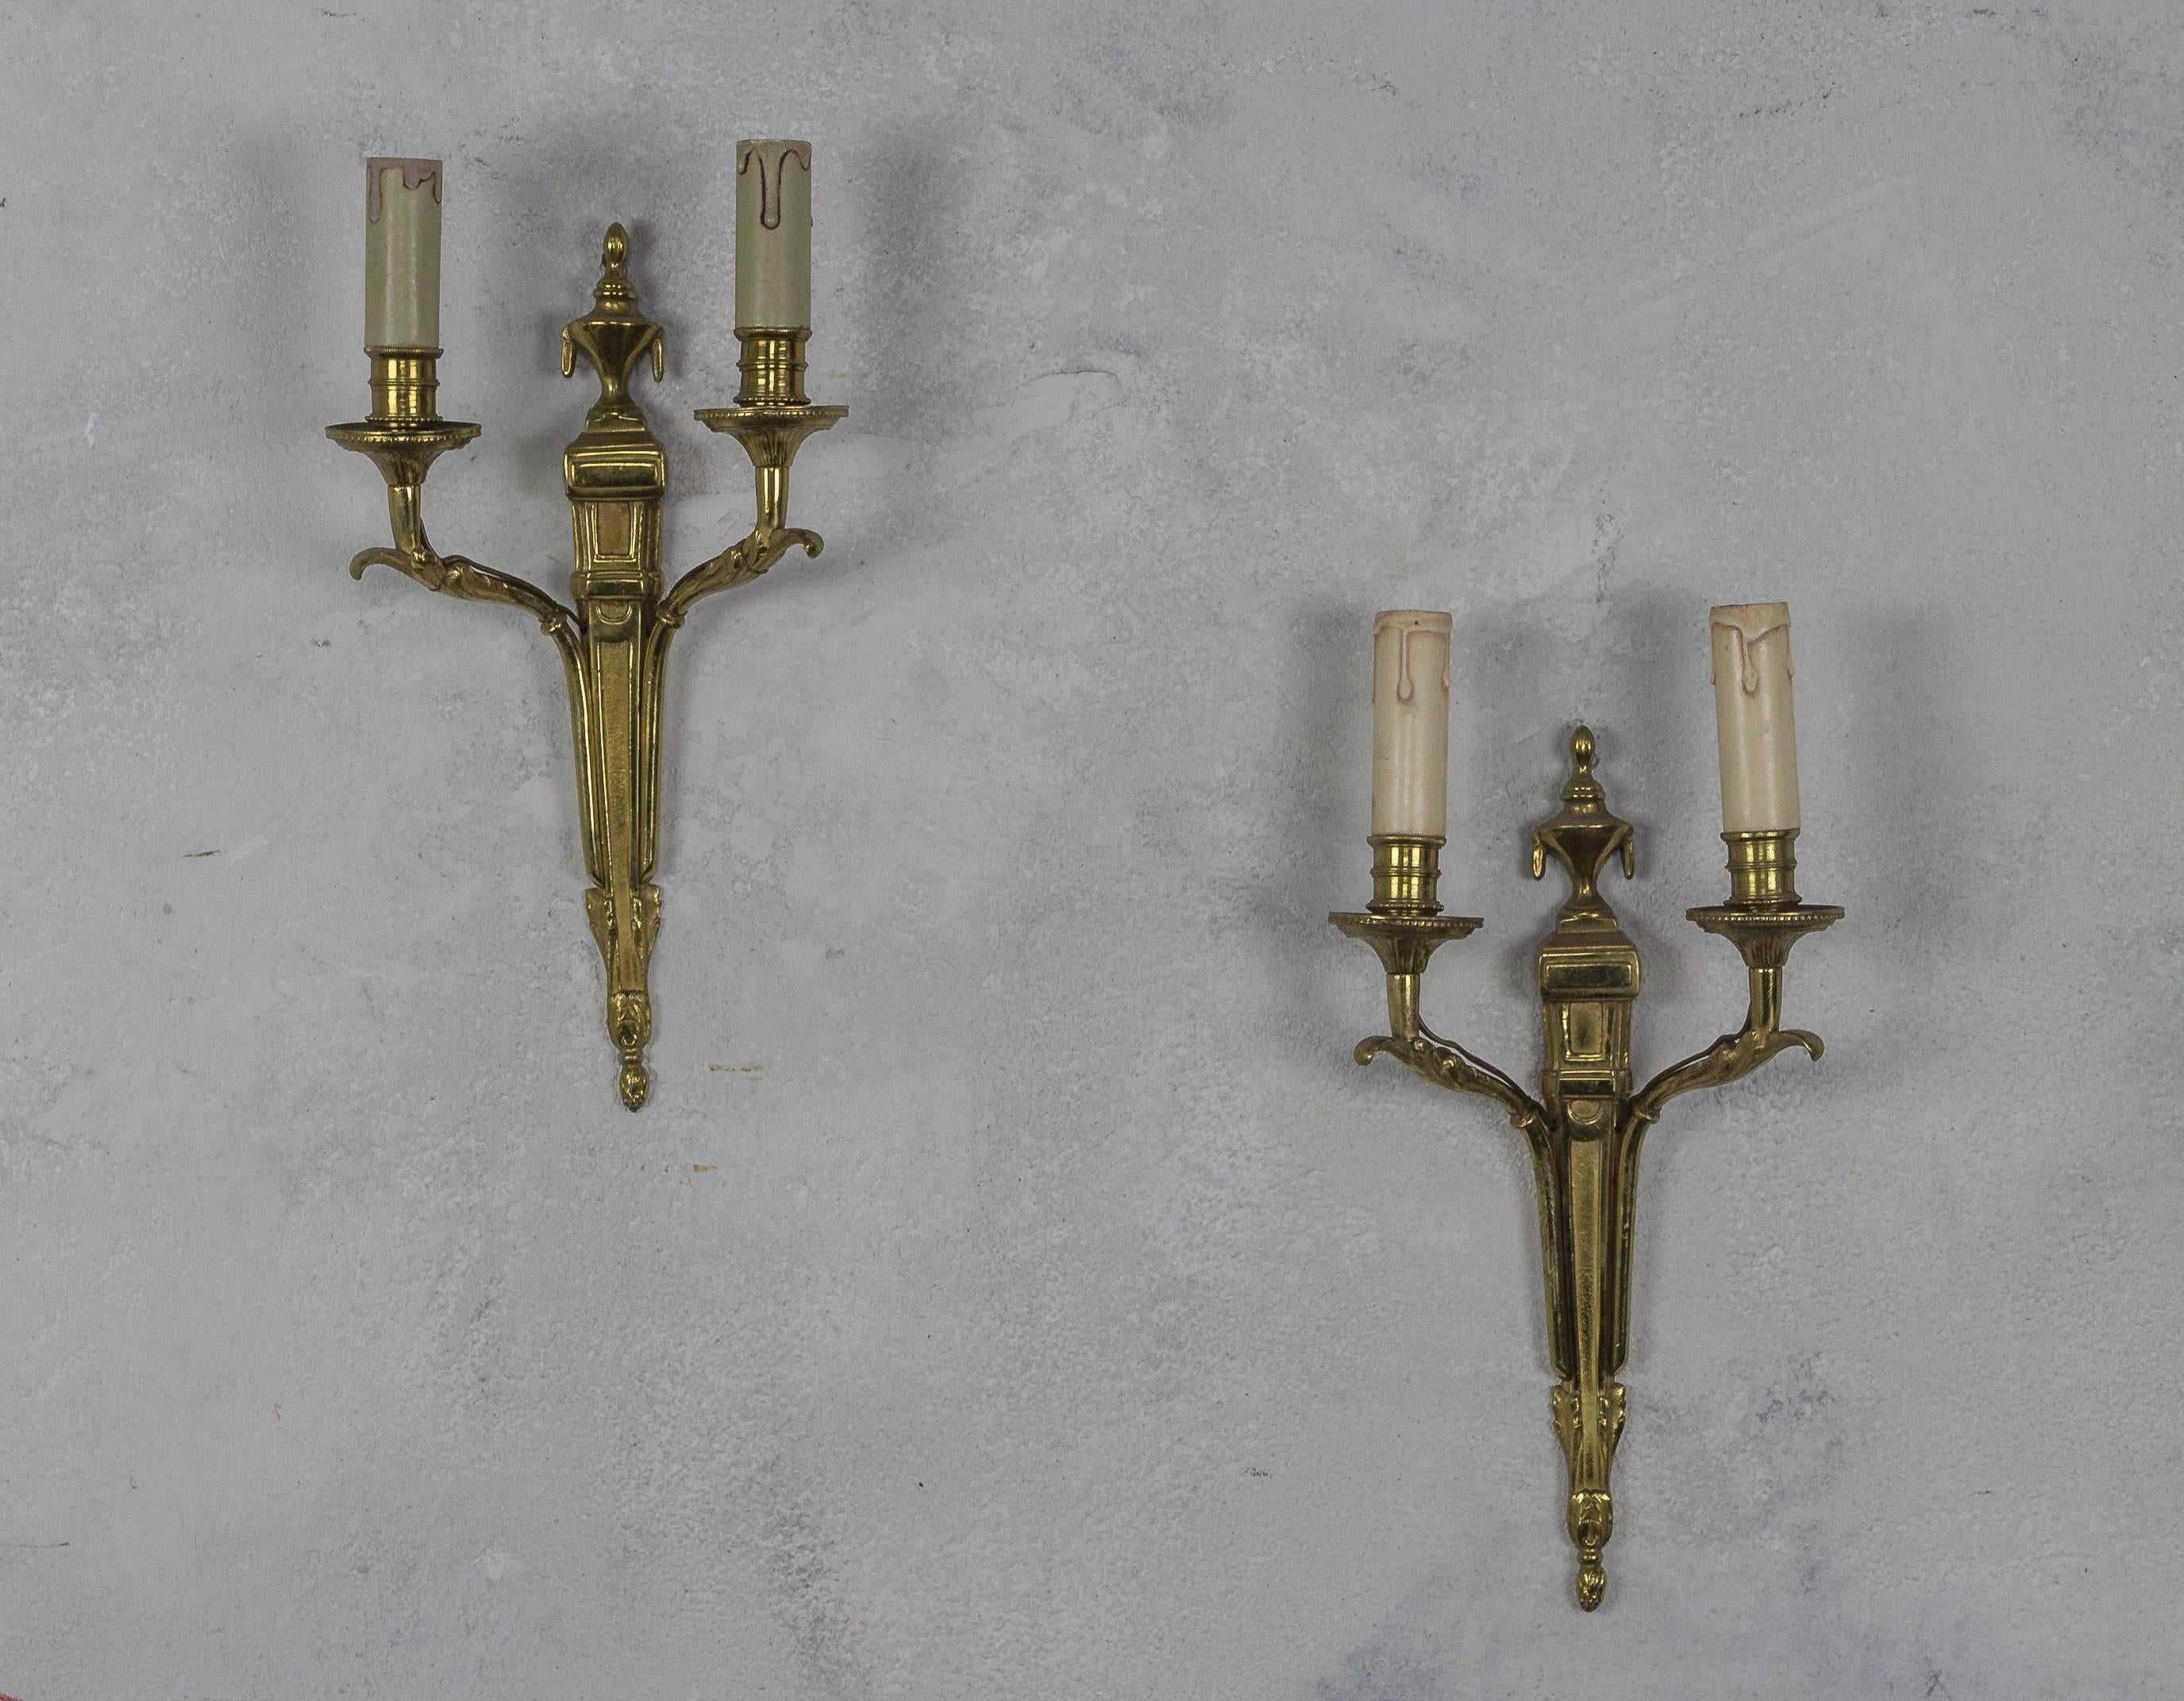 Pair of small decorative French 1940s gilt bronze sconces. Very good vintage condition. Wired for showroom display, not UL Code. 

Ref #: LS0408-10

Dimensions: 14